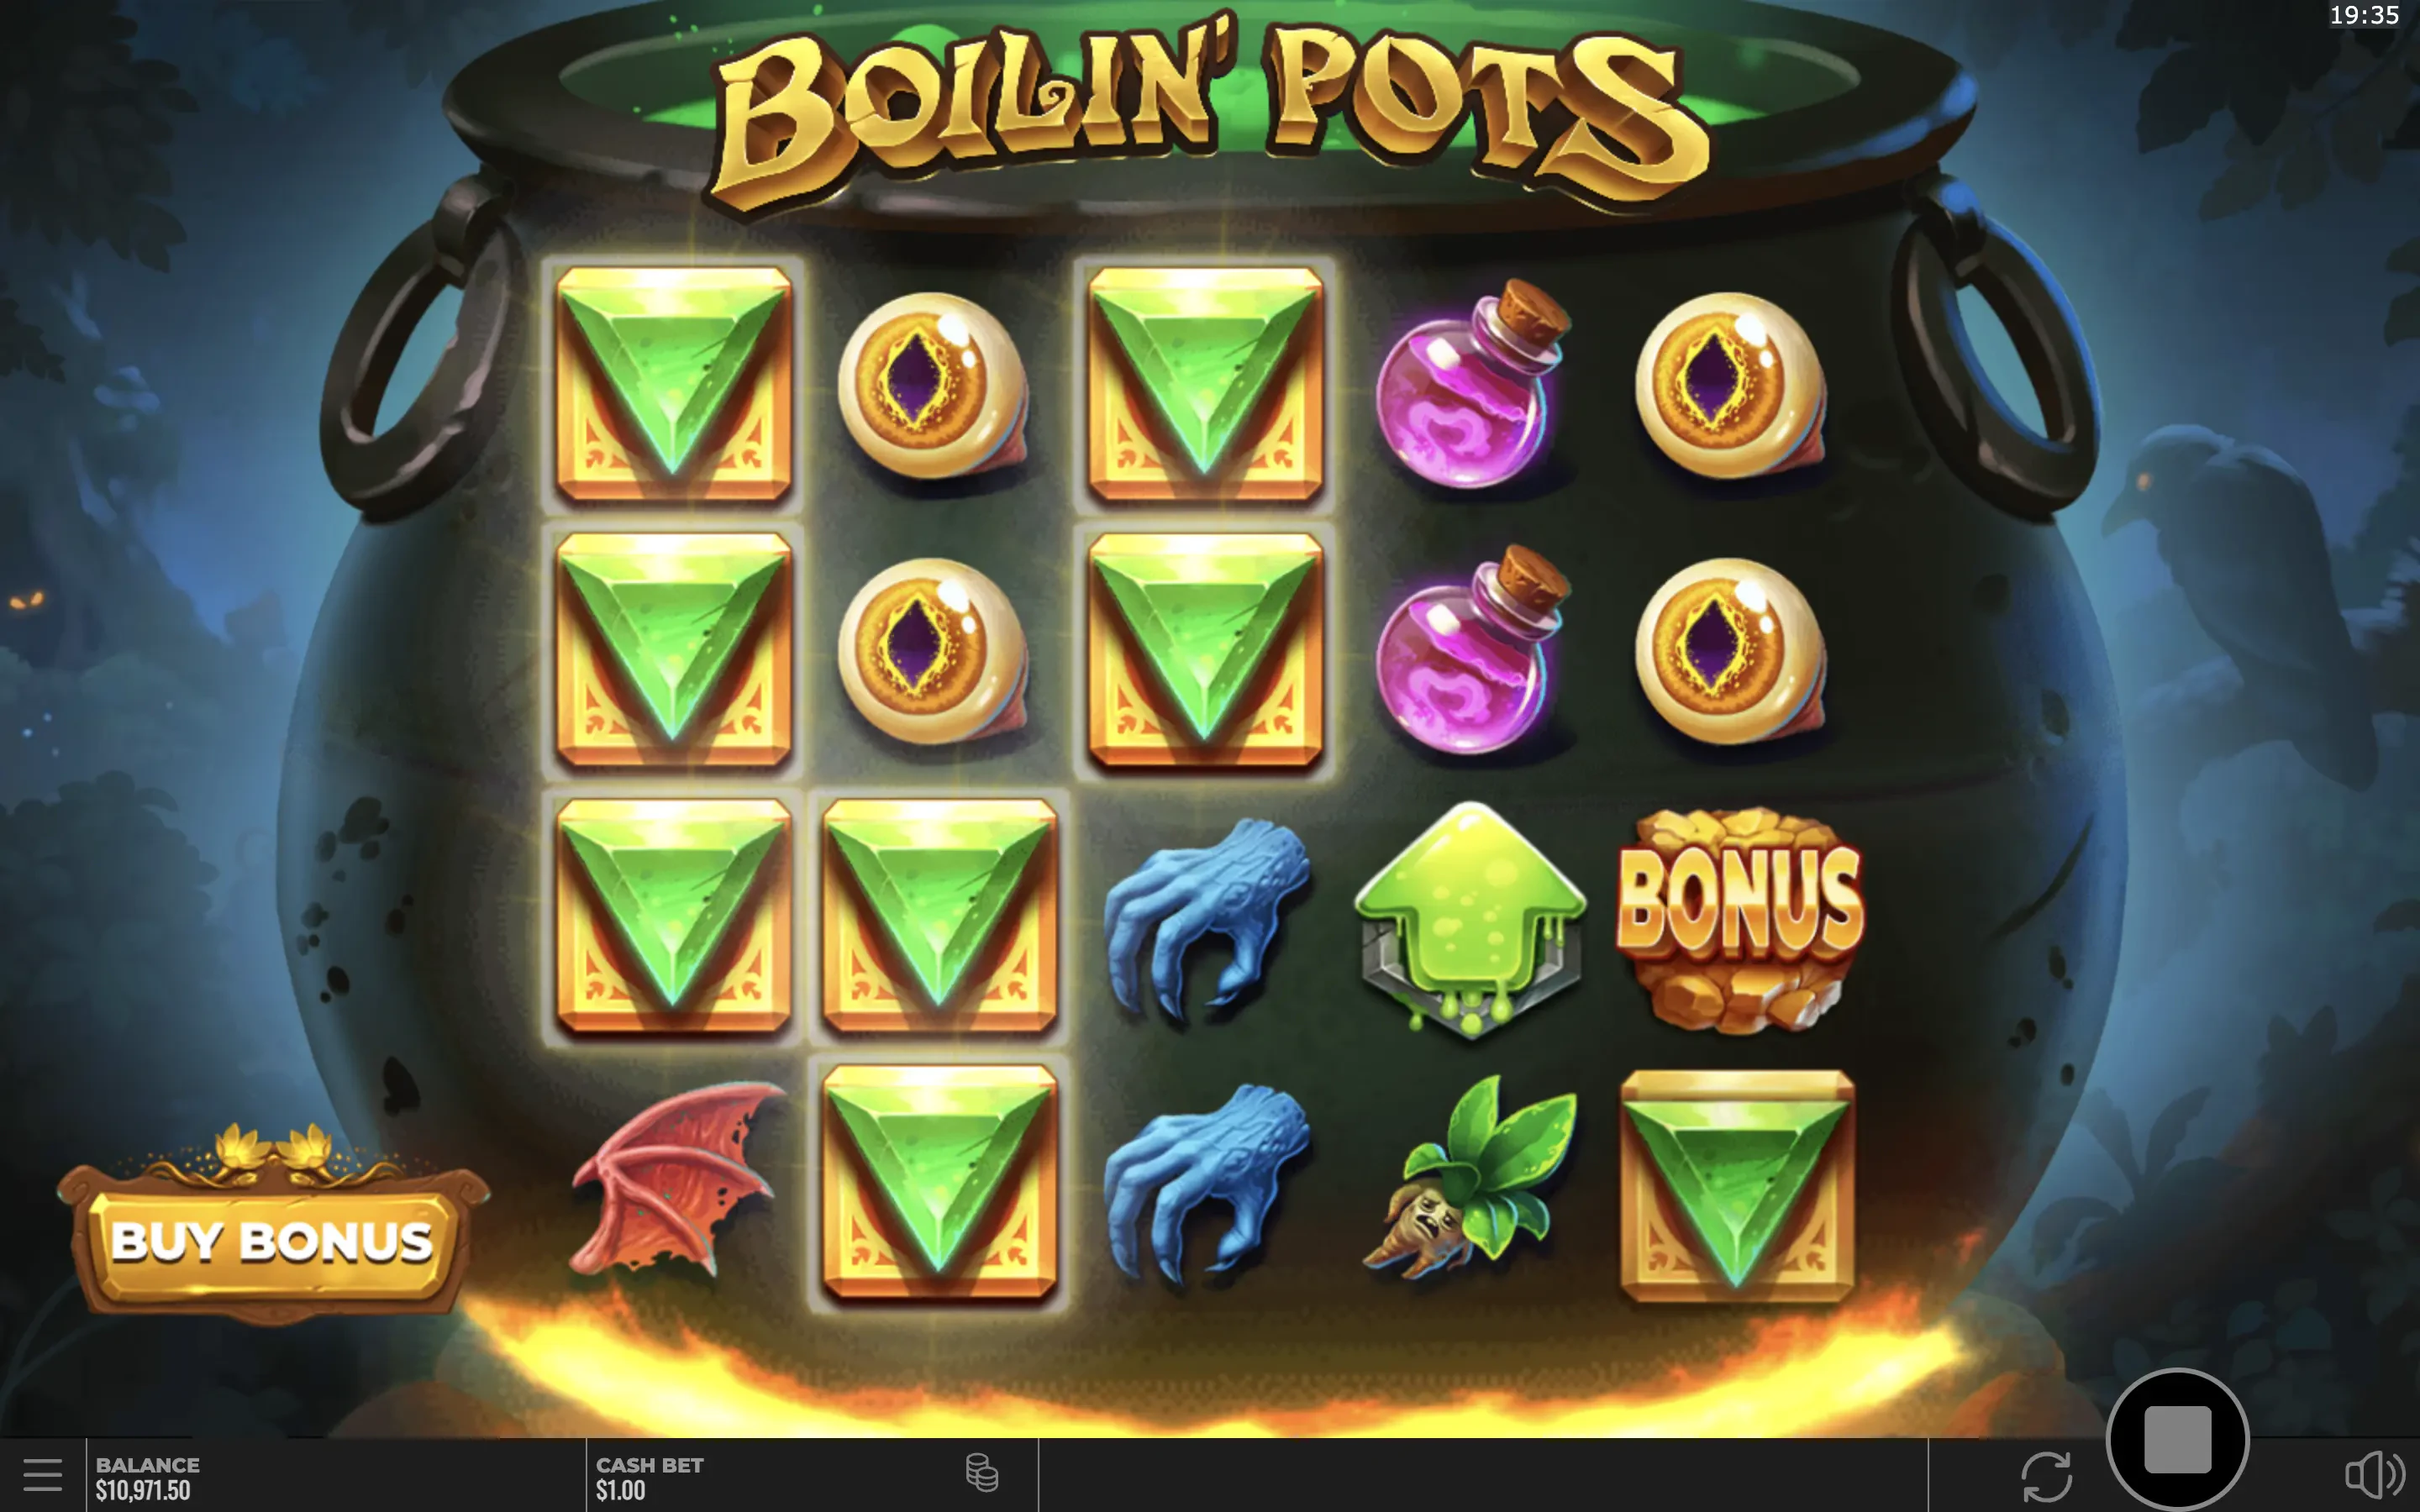 The base game feature in Boilin' Pots